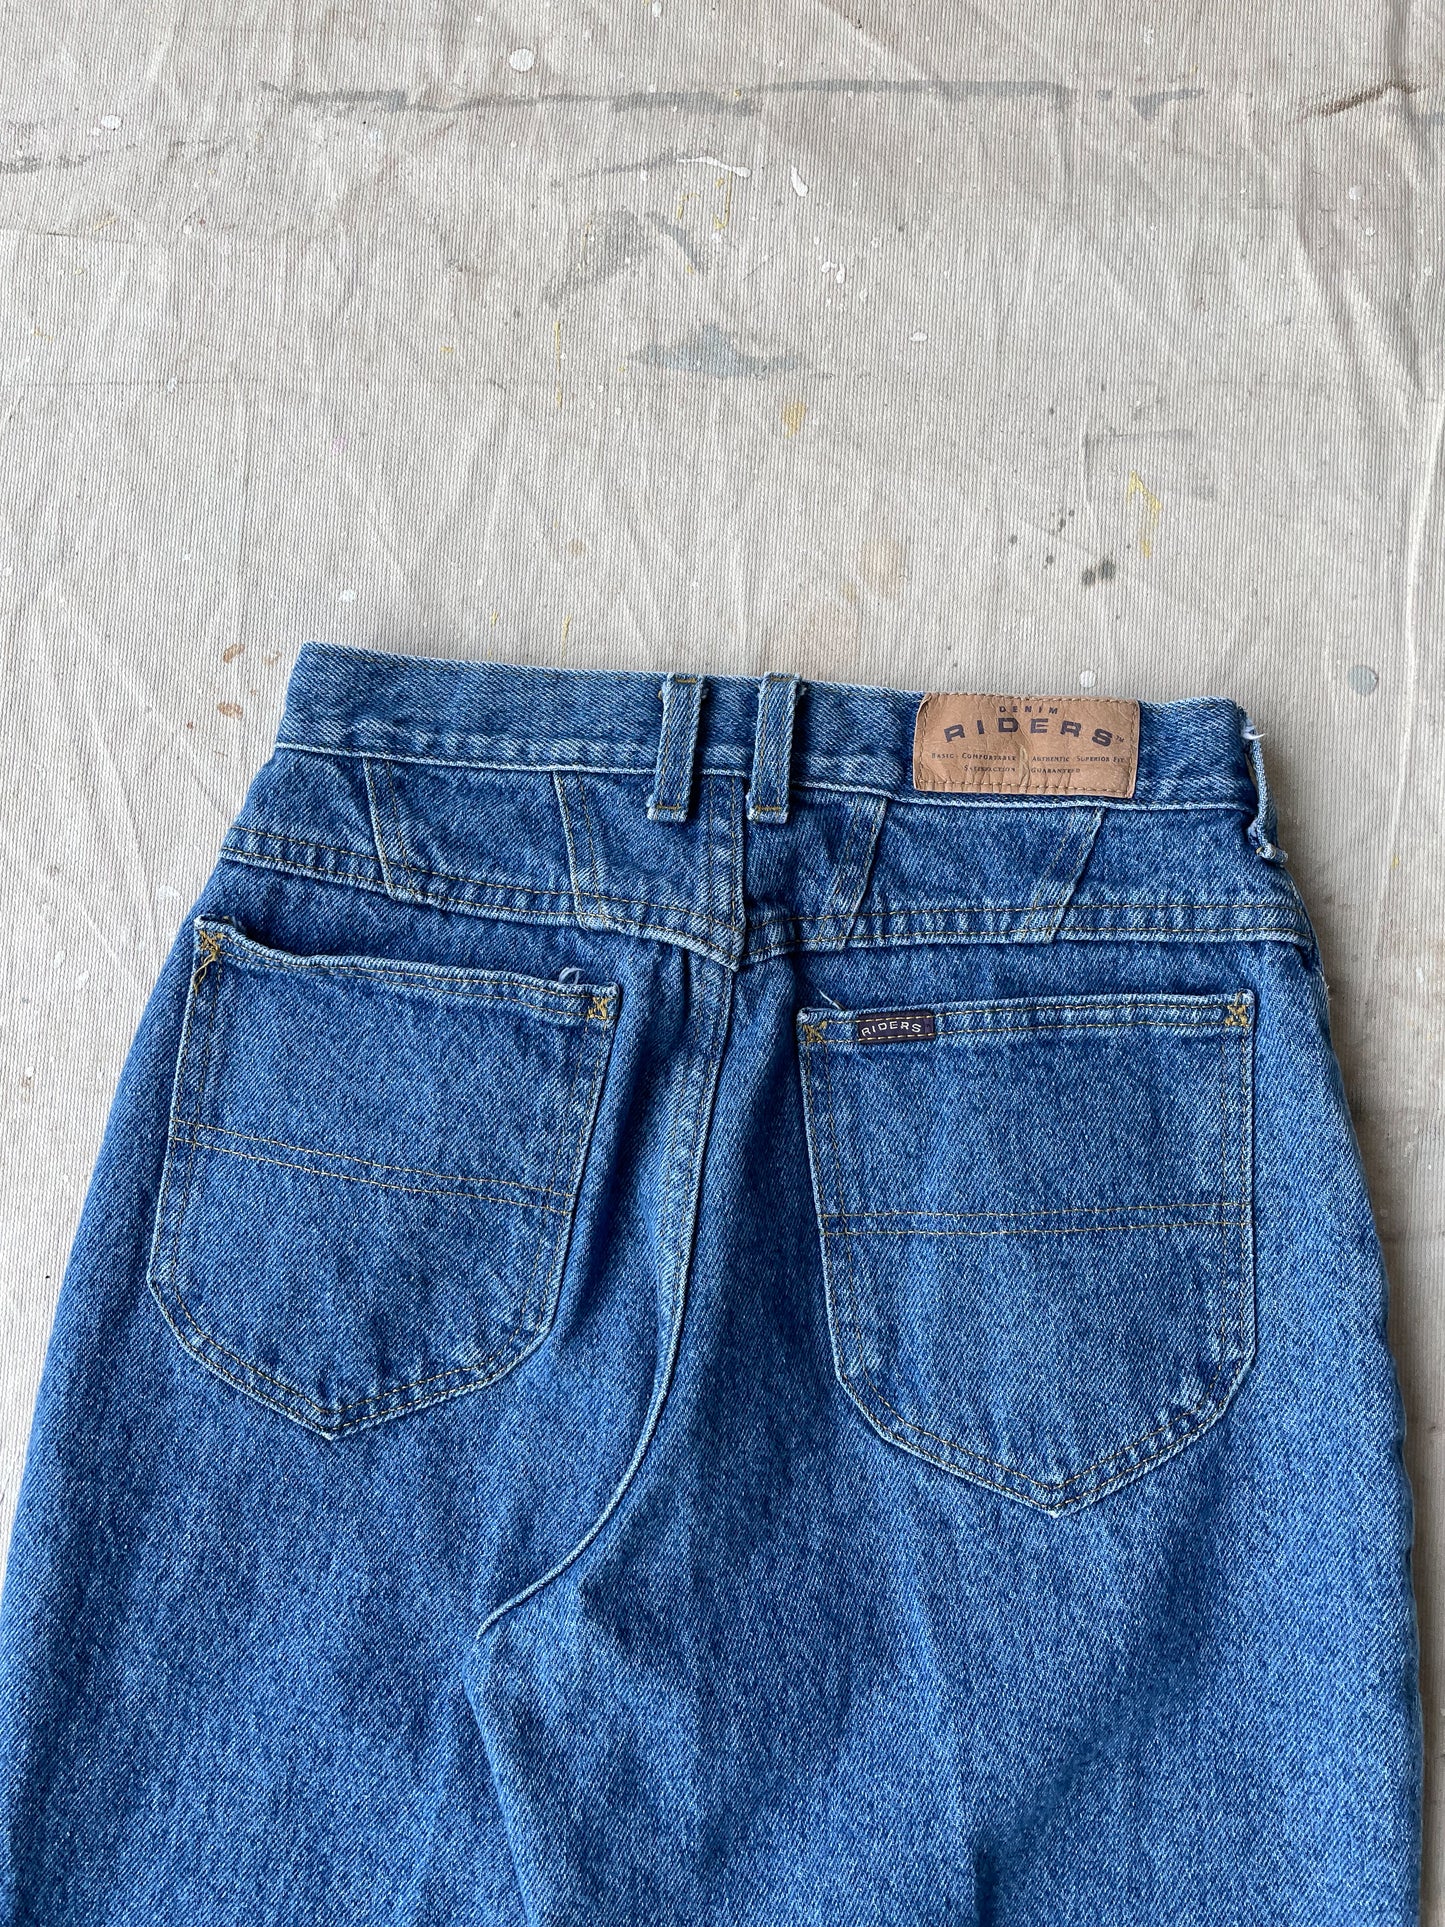 Lee Riders Jeans—[26x30]